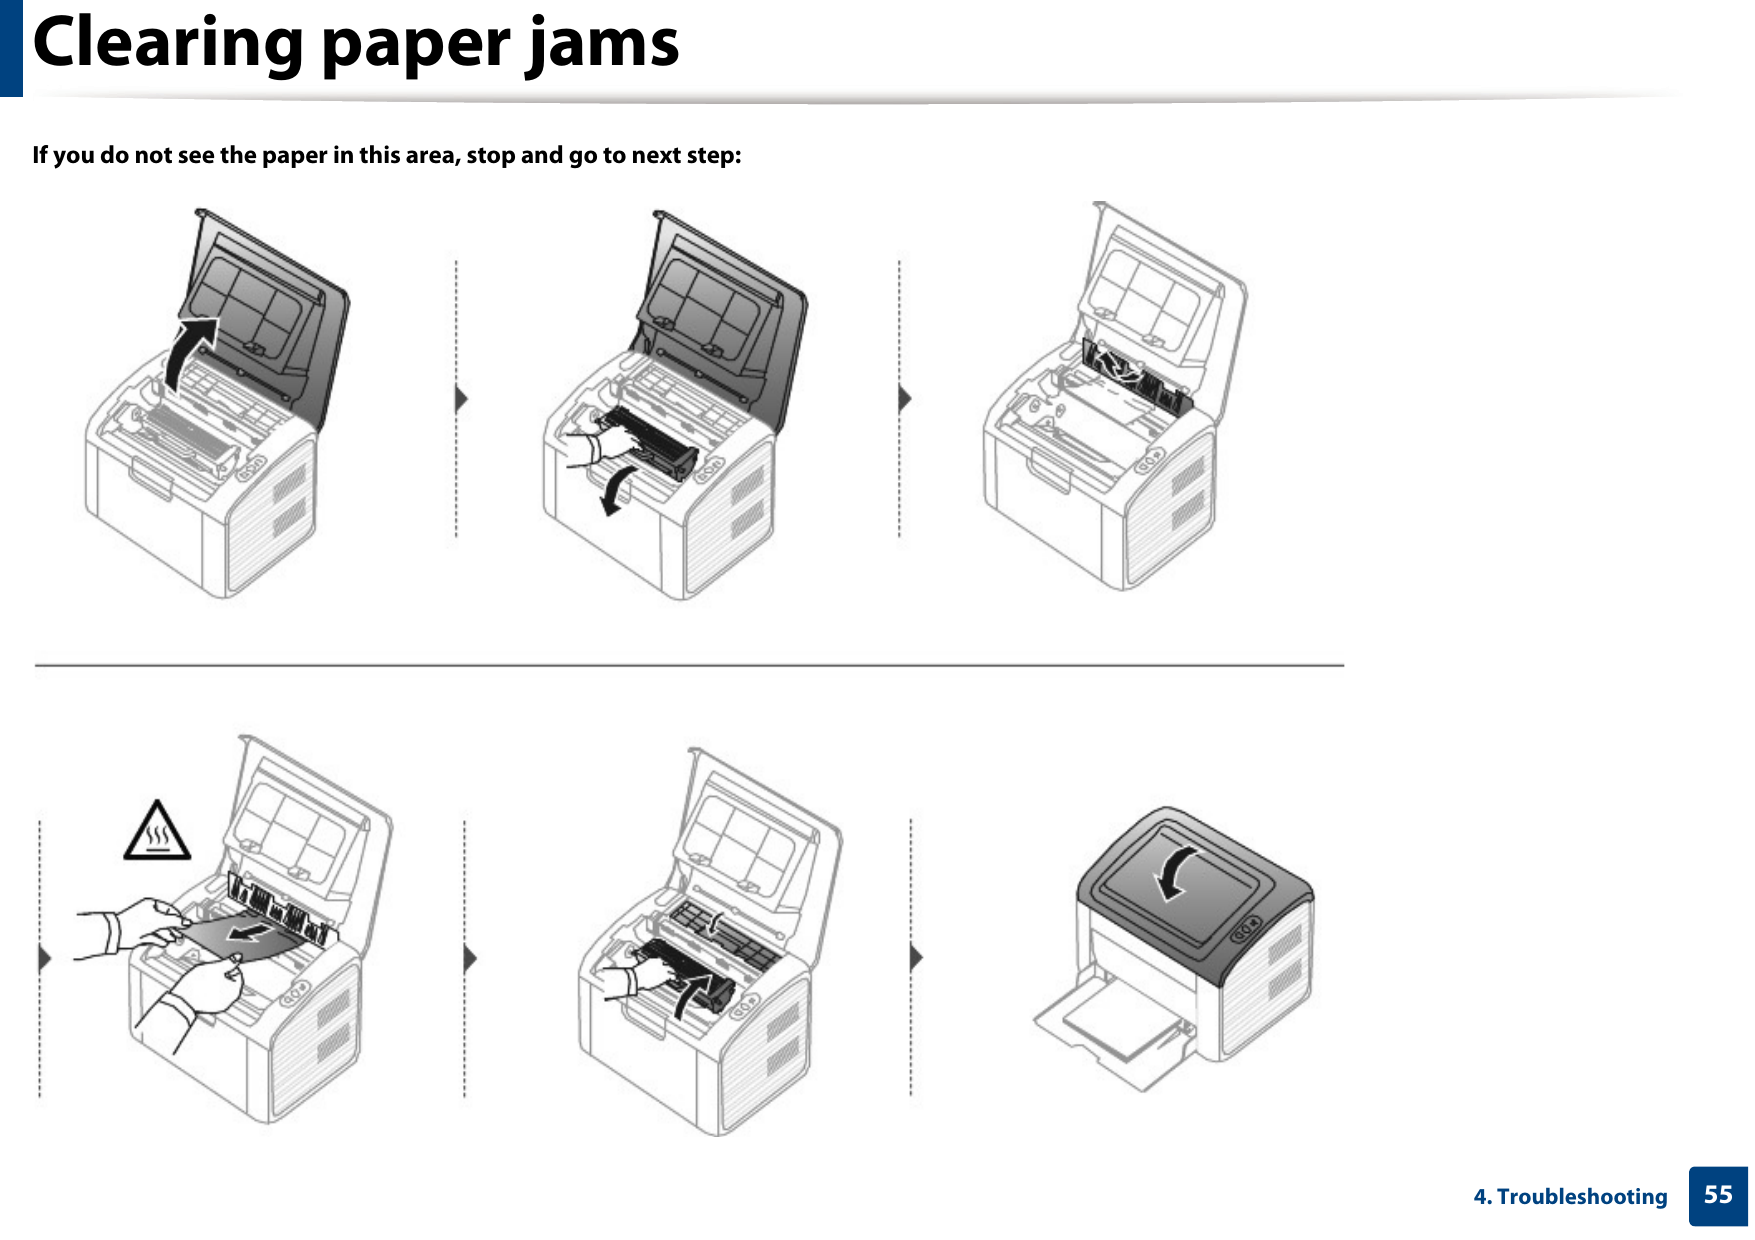 Clearing paper jams554. TroubleshootingIf you do not see the paper in this area, stop and go to next step: